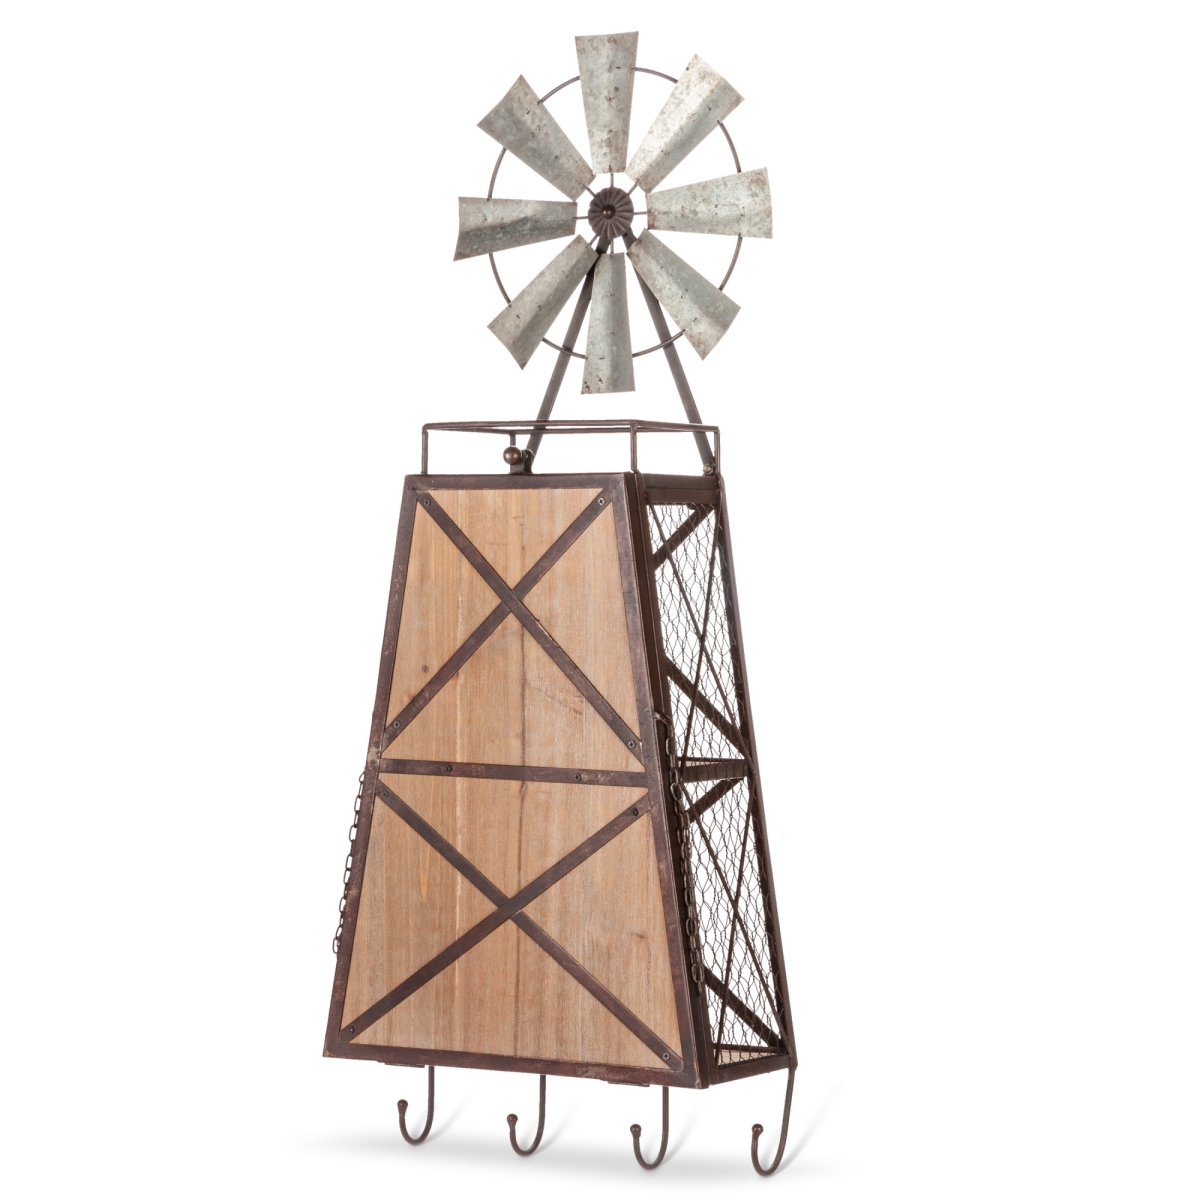 Gerson 94599ec 35 In. Wood & Metal Windmill Beverage Bar With Drop Down Bar & Hanging Drinkware Holder - Multi Color